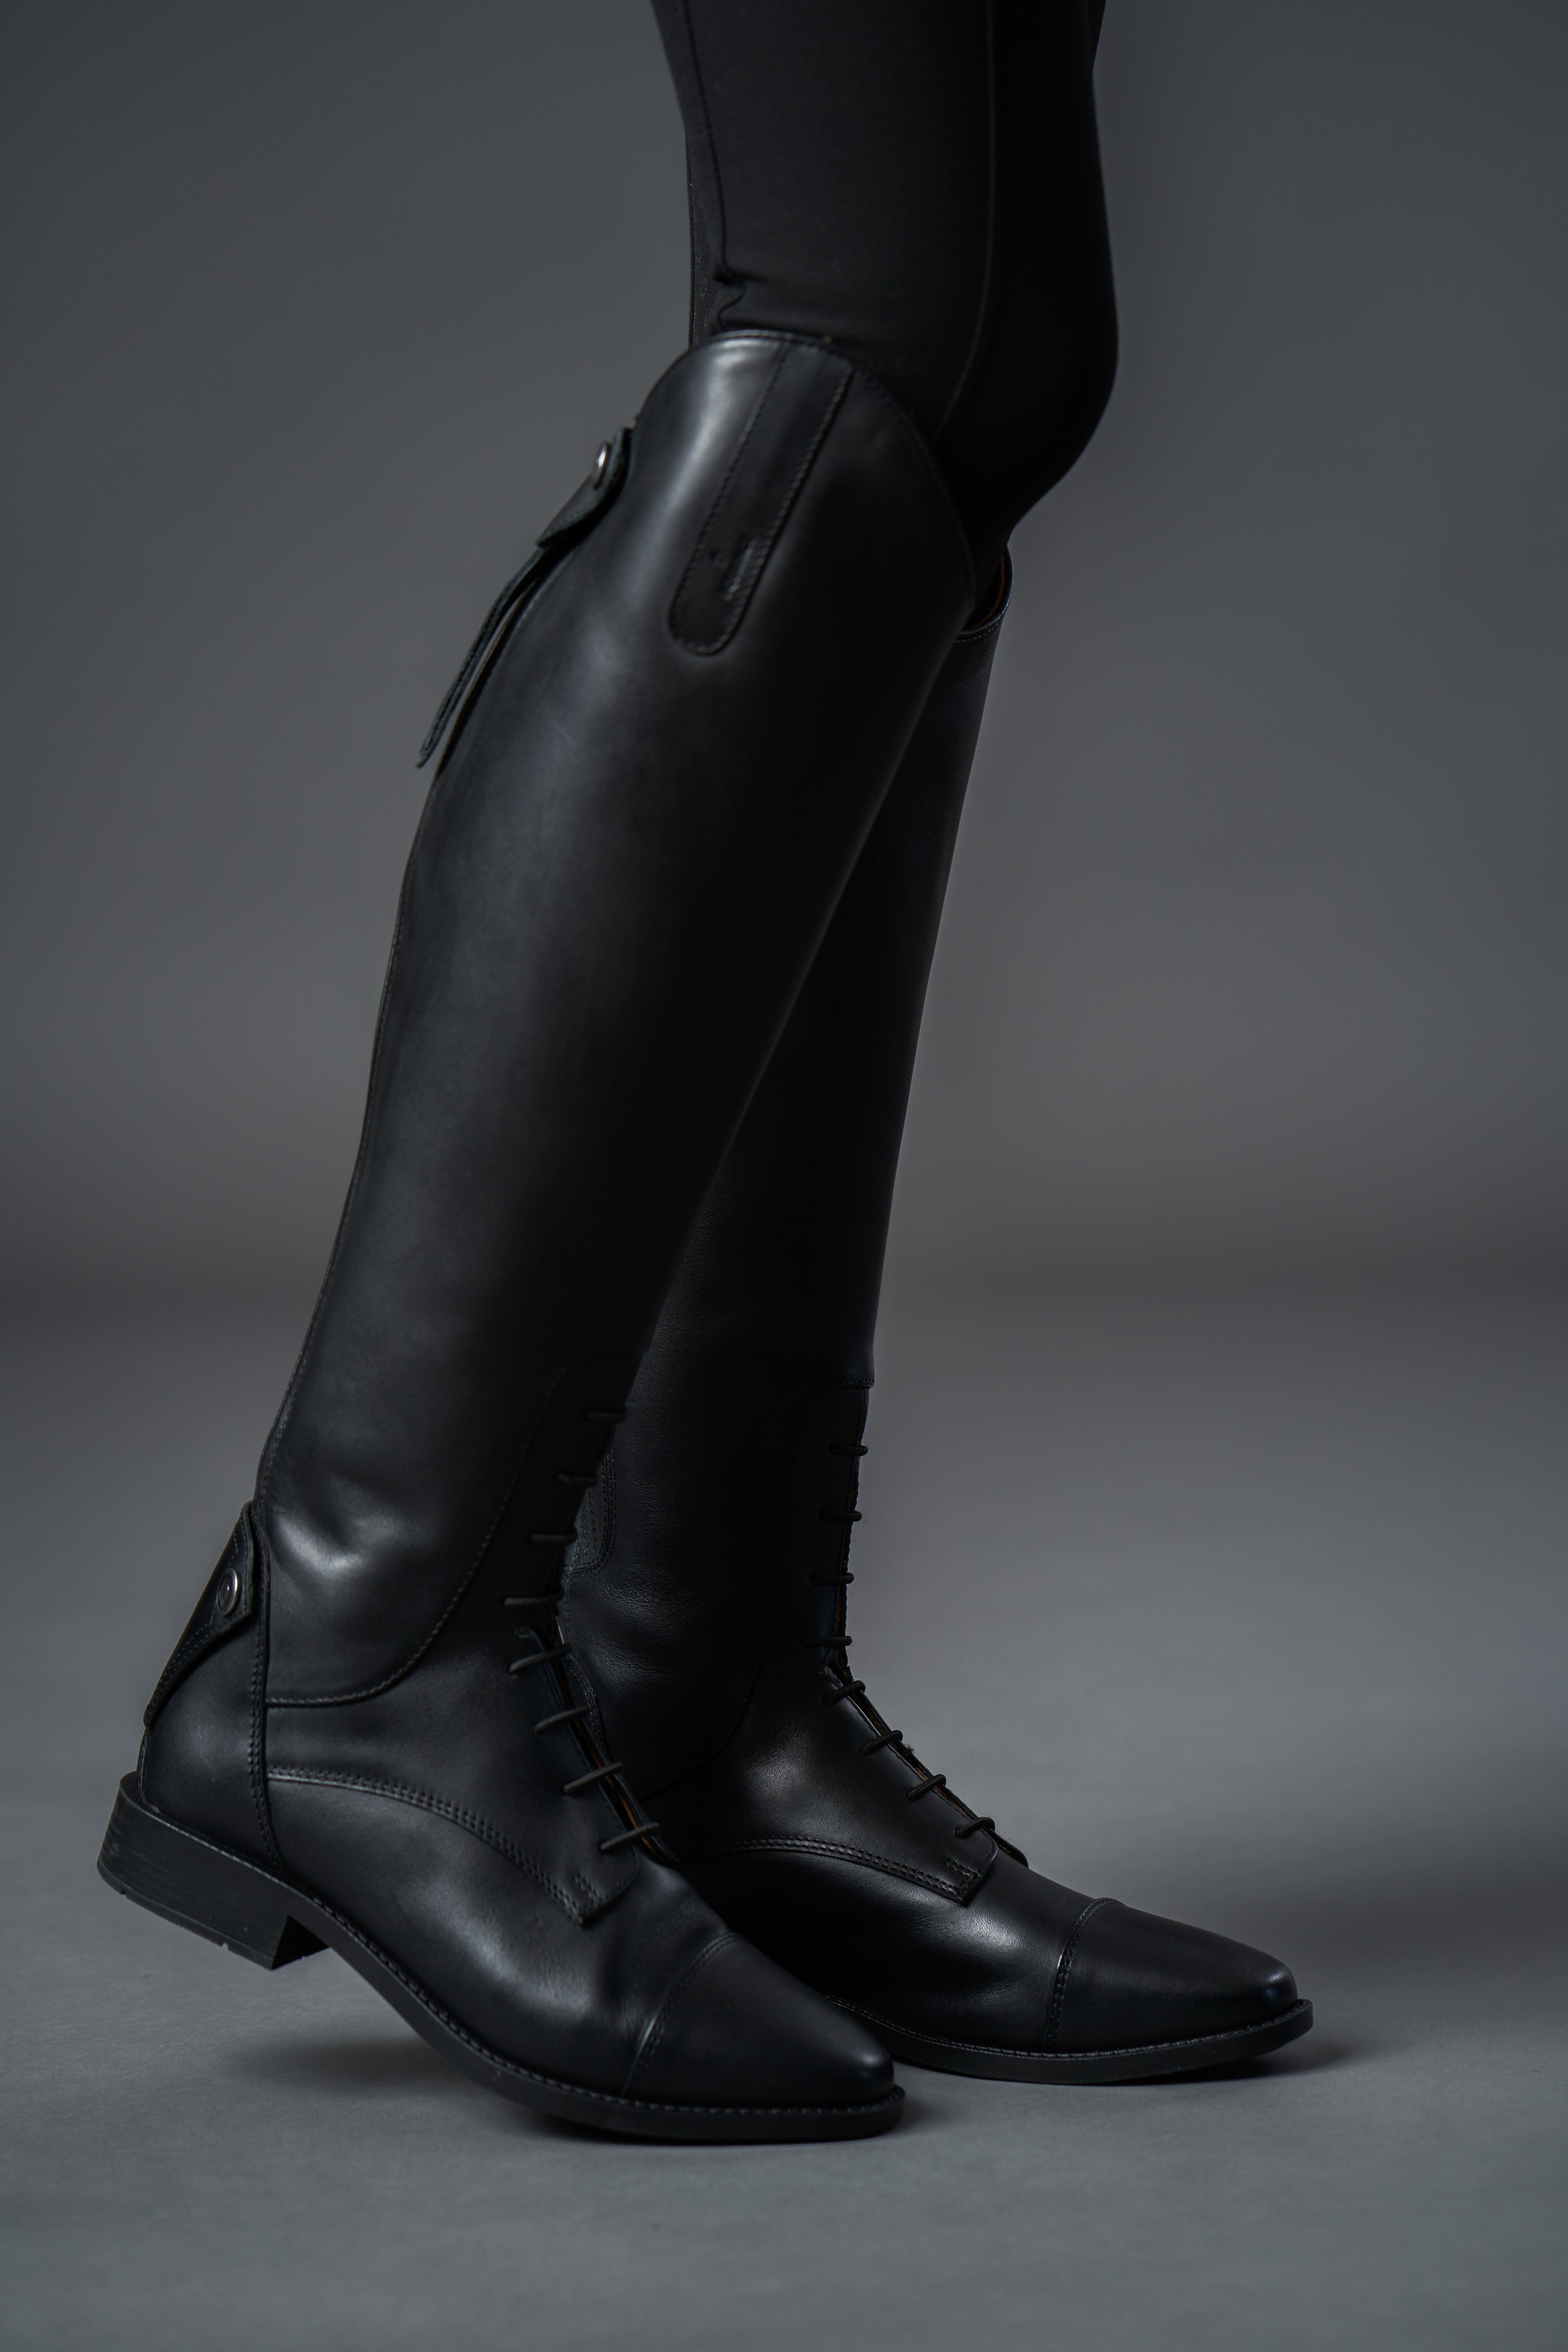 Equipage Megan W Riding Boots - Black (41)